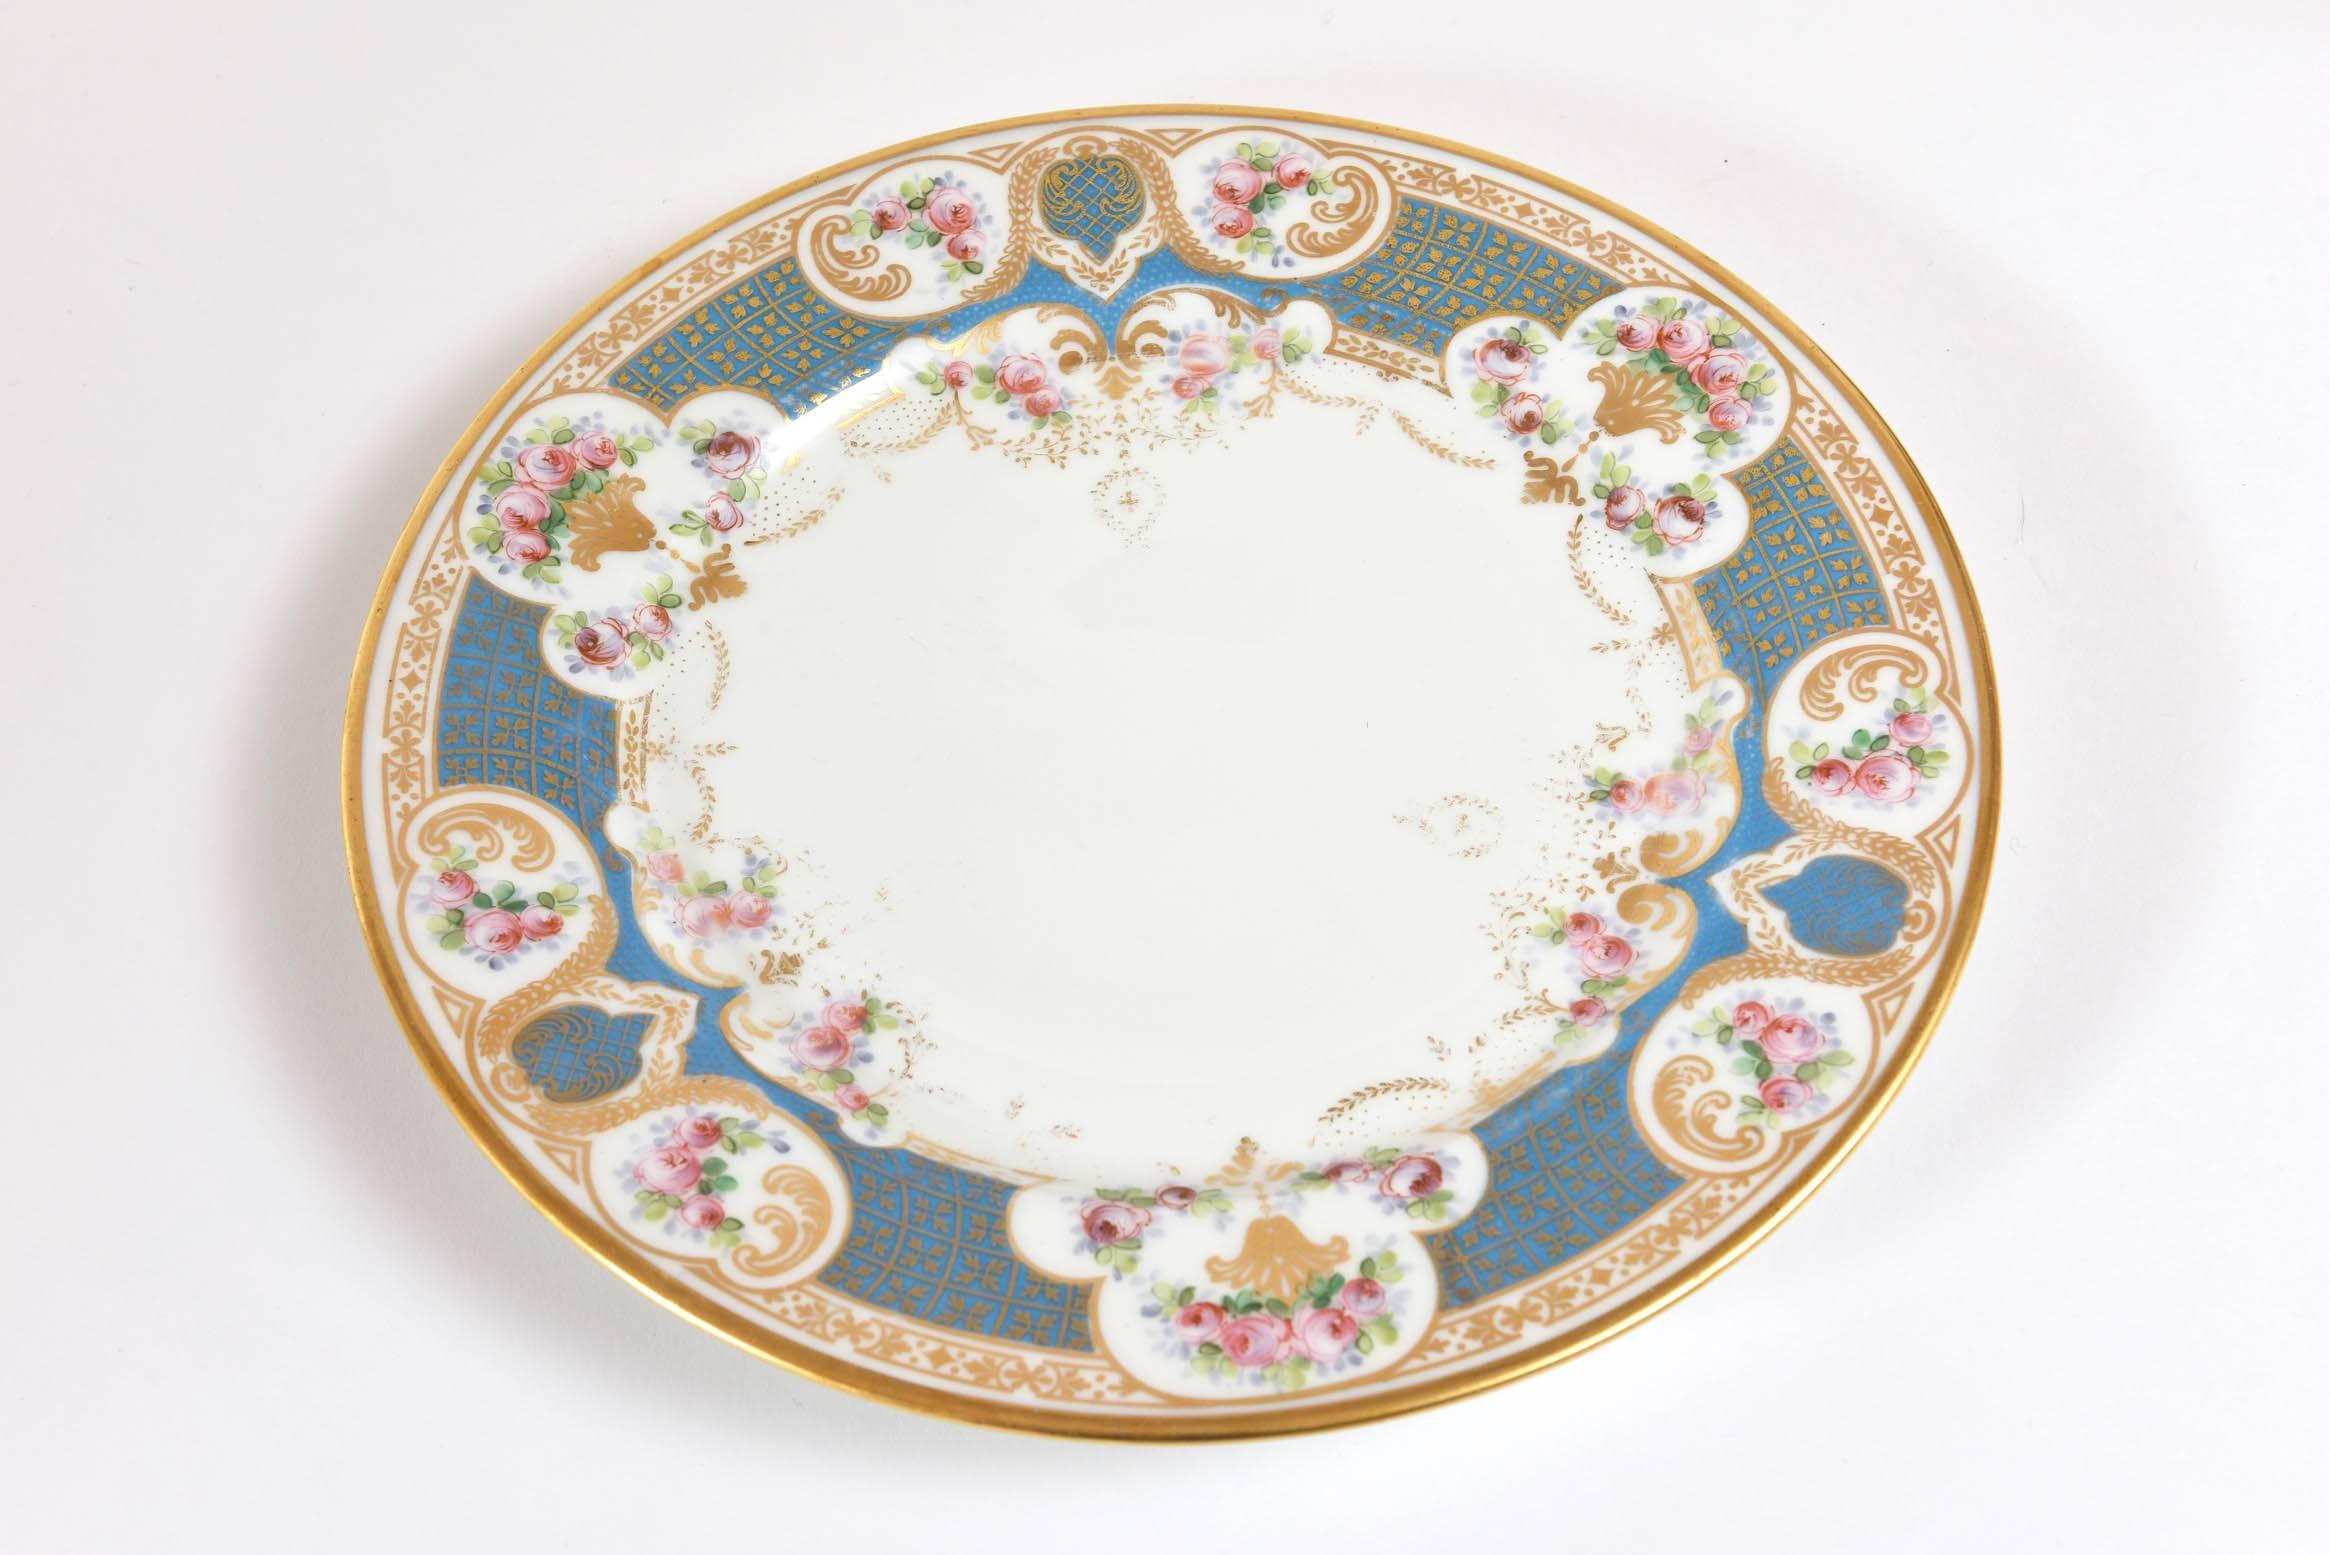 Hand-Crafted Pretty Turquoise and Rose Pink Dinner Plates, Antique, circa 1900